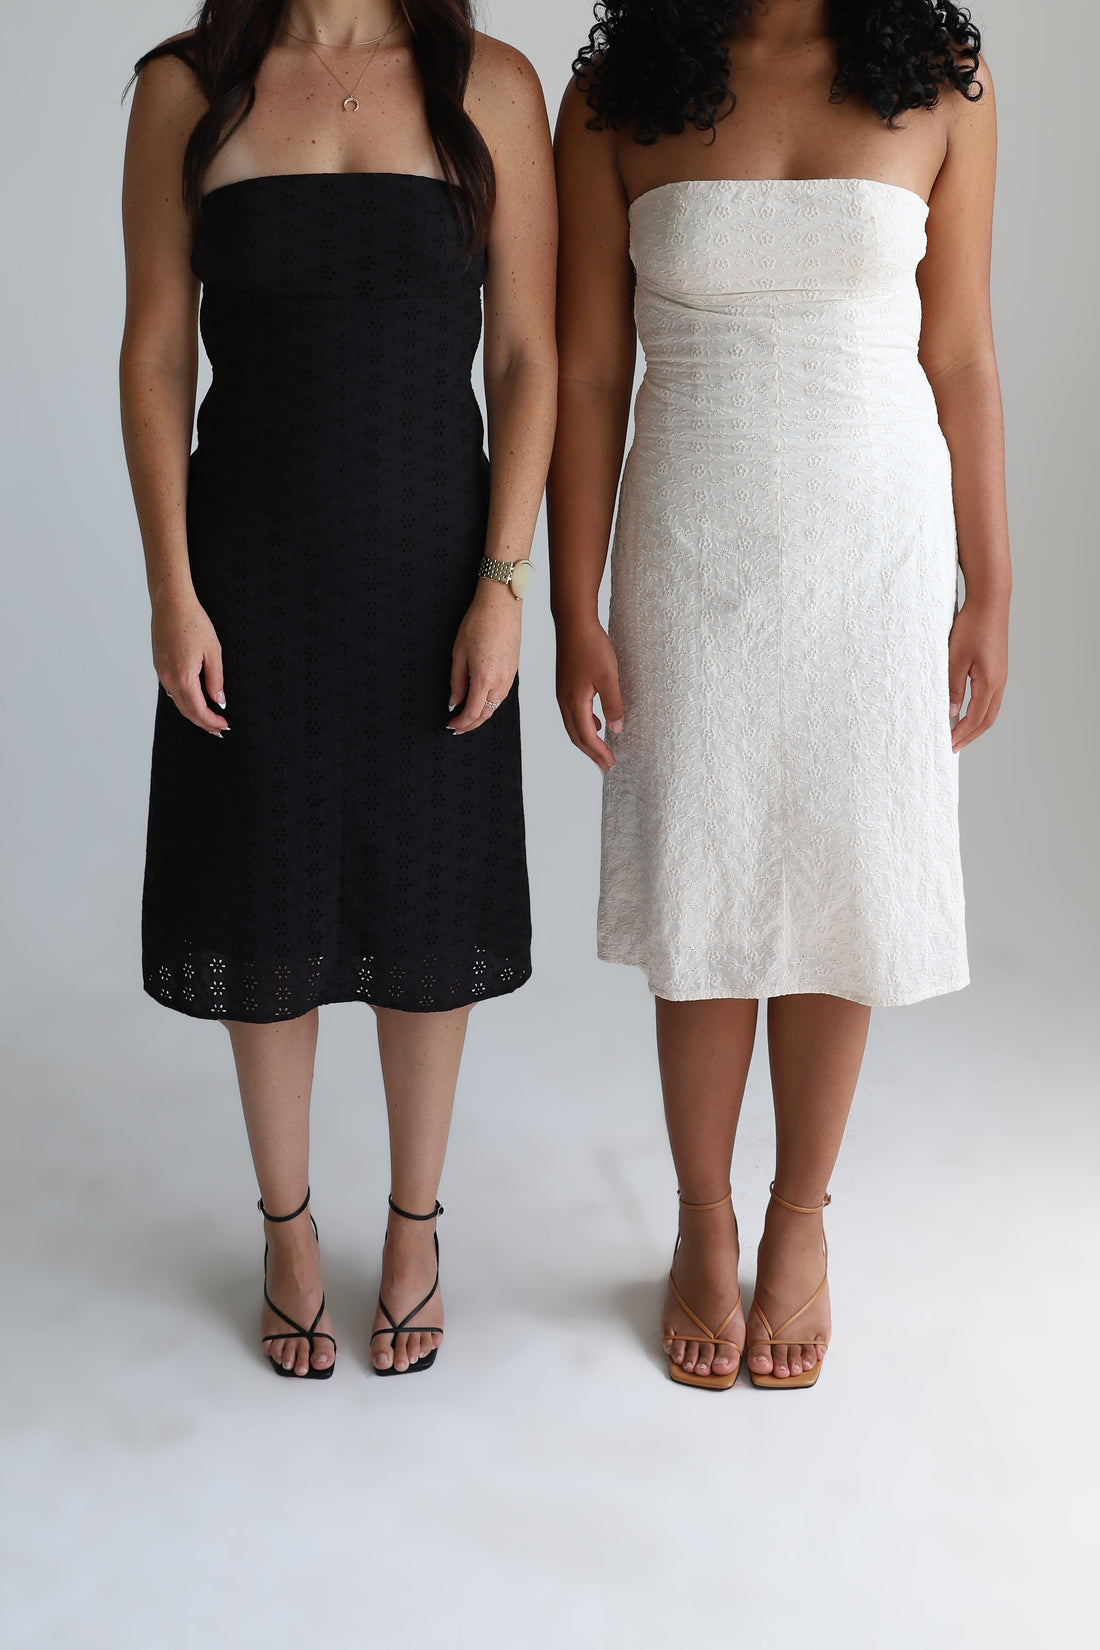 Two girls wearing black and white versions of a strapless dress.